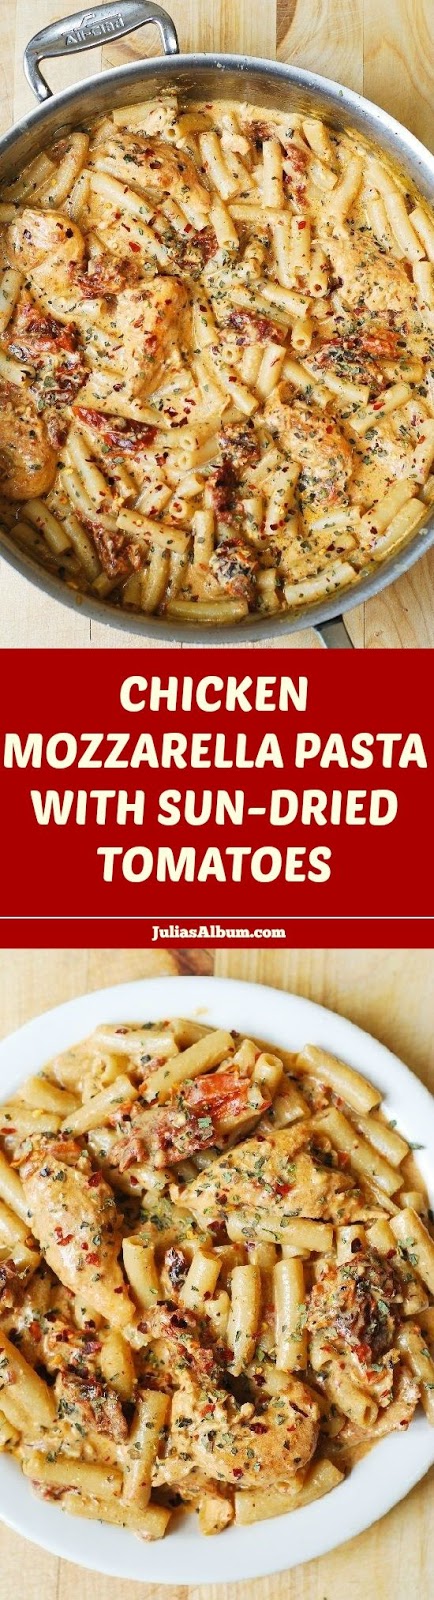 "Chicken with sun-dried tomatoes and penne pasta in a creamy mozzarella cheese sauce seasoned with basil, crushed red pepper flakes." JuliasAlbum.com